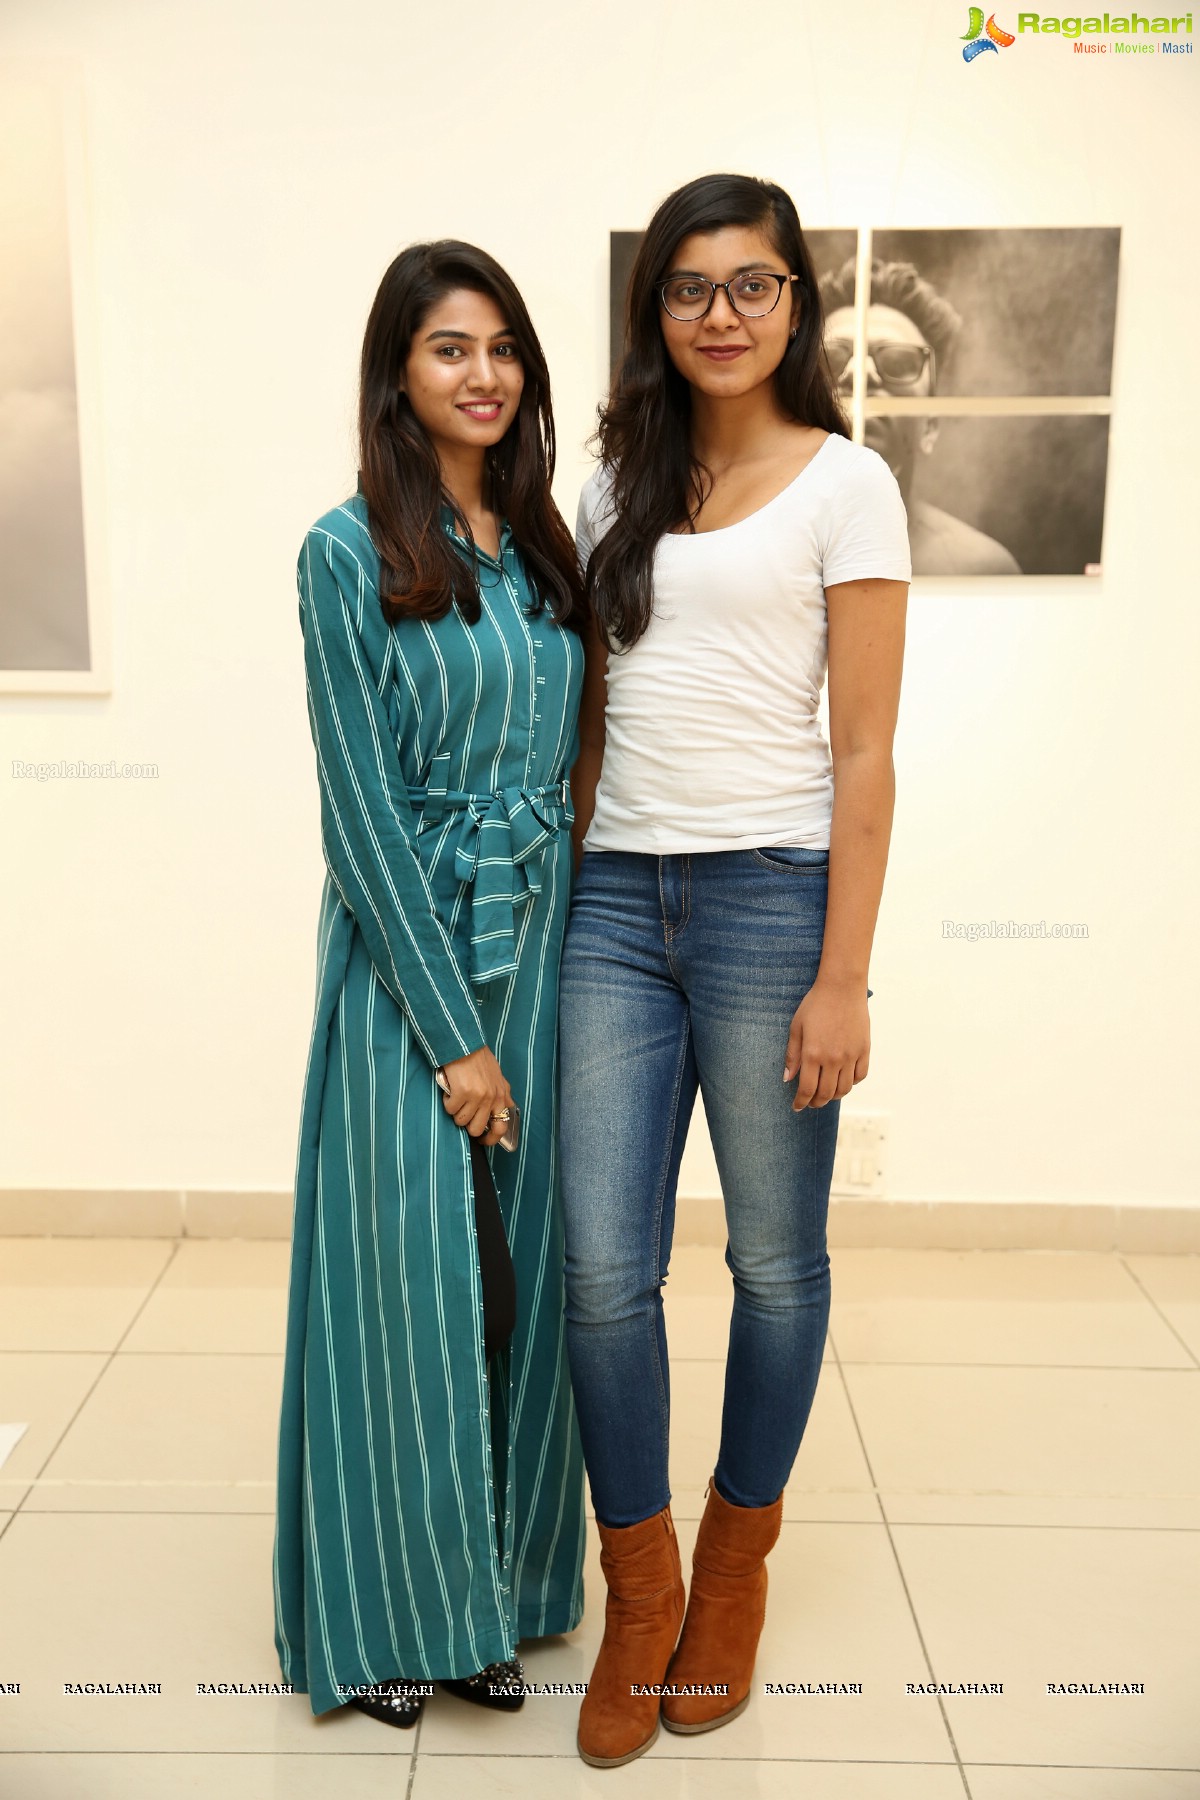 Pixel Perfect 2019 Photography Exhibition & Sale by Hamstech's Students